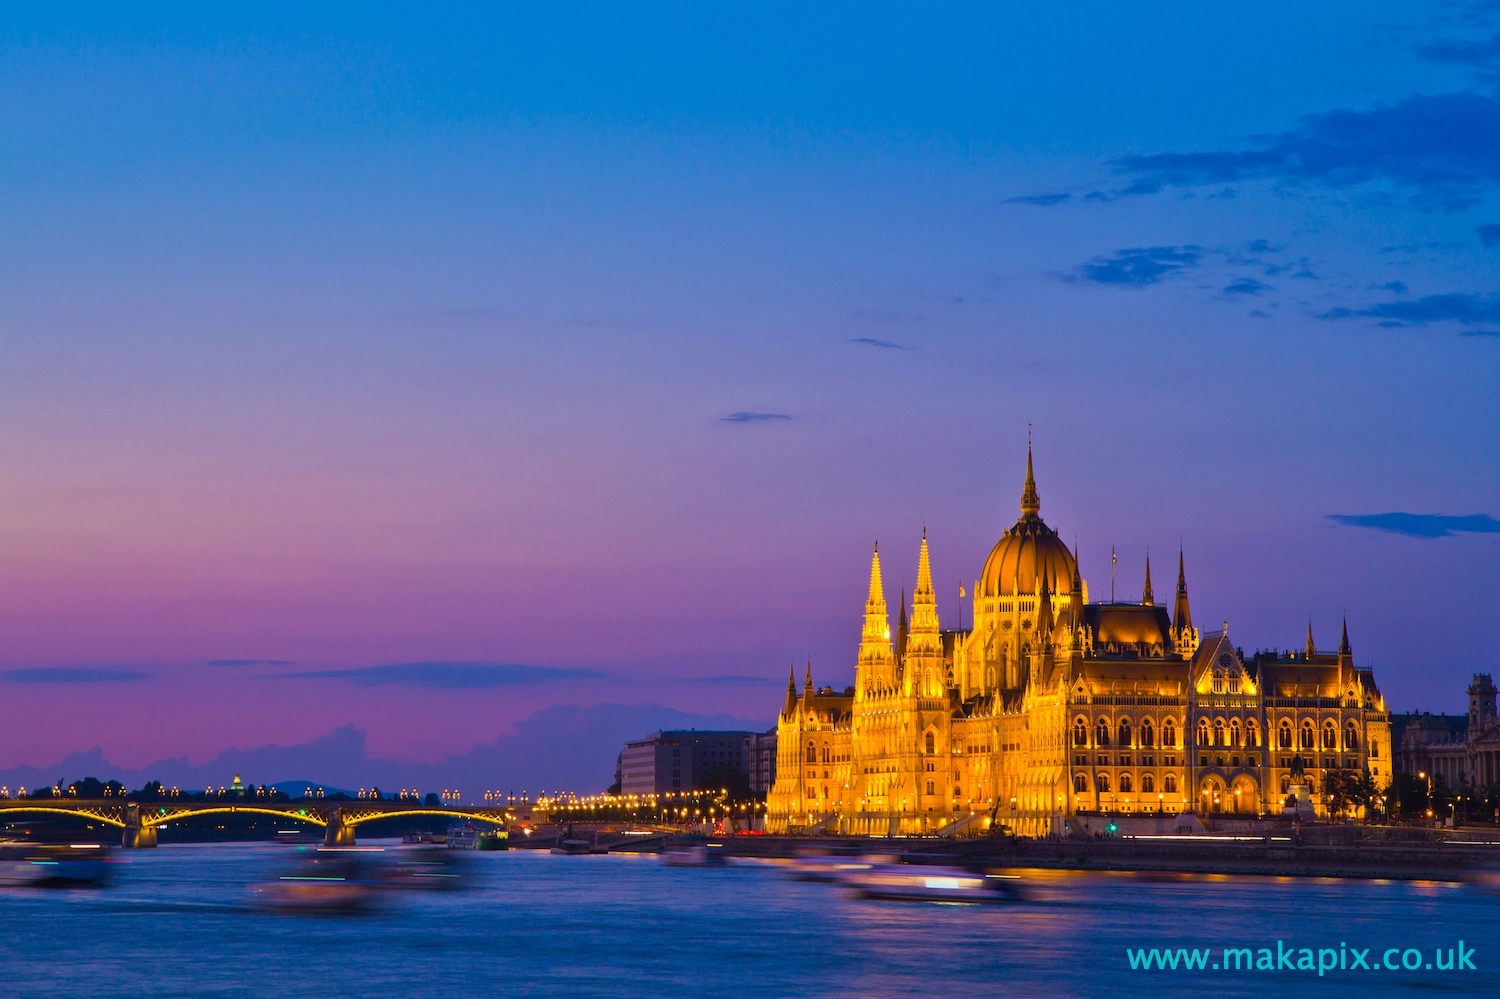 The Budapest Parliament Building at sunset